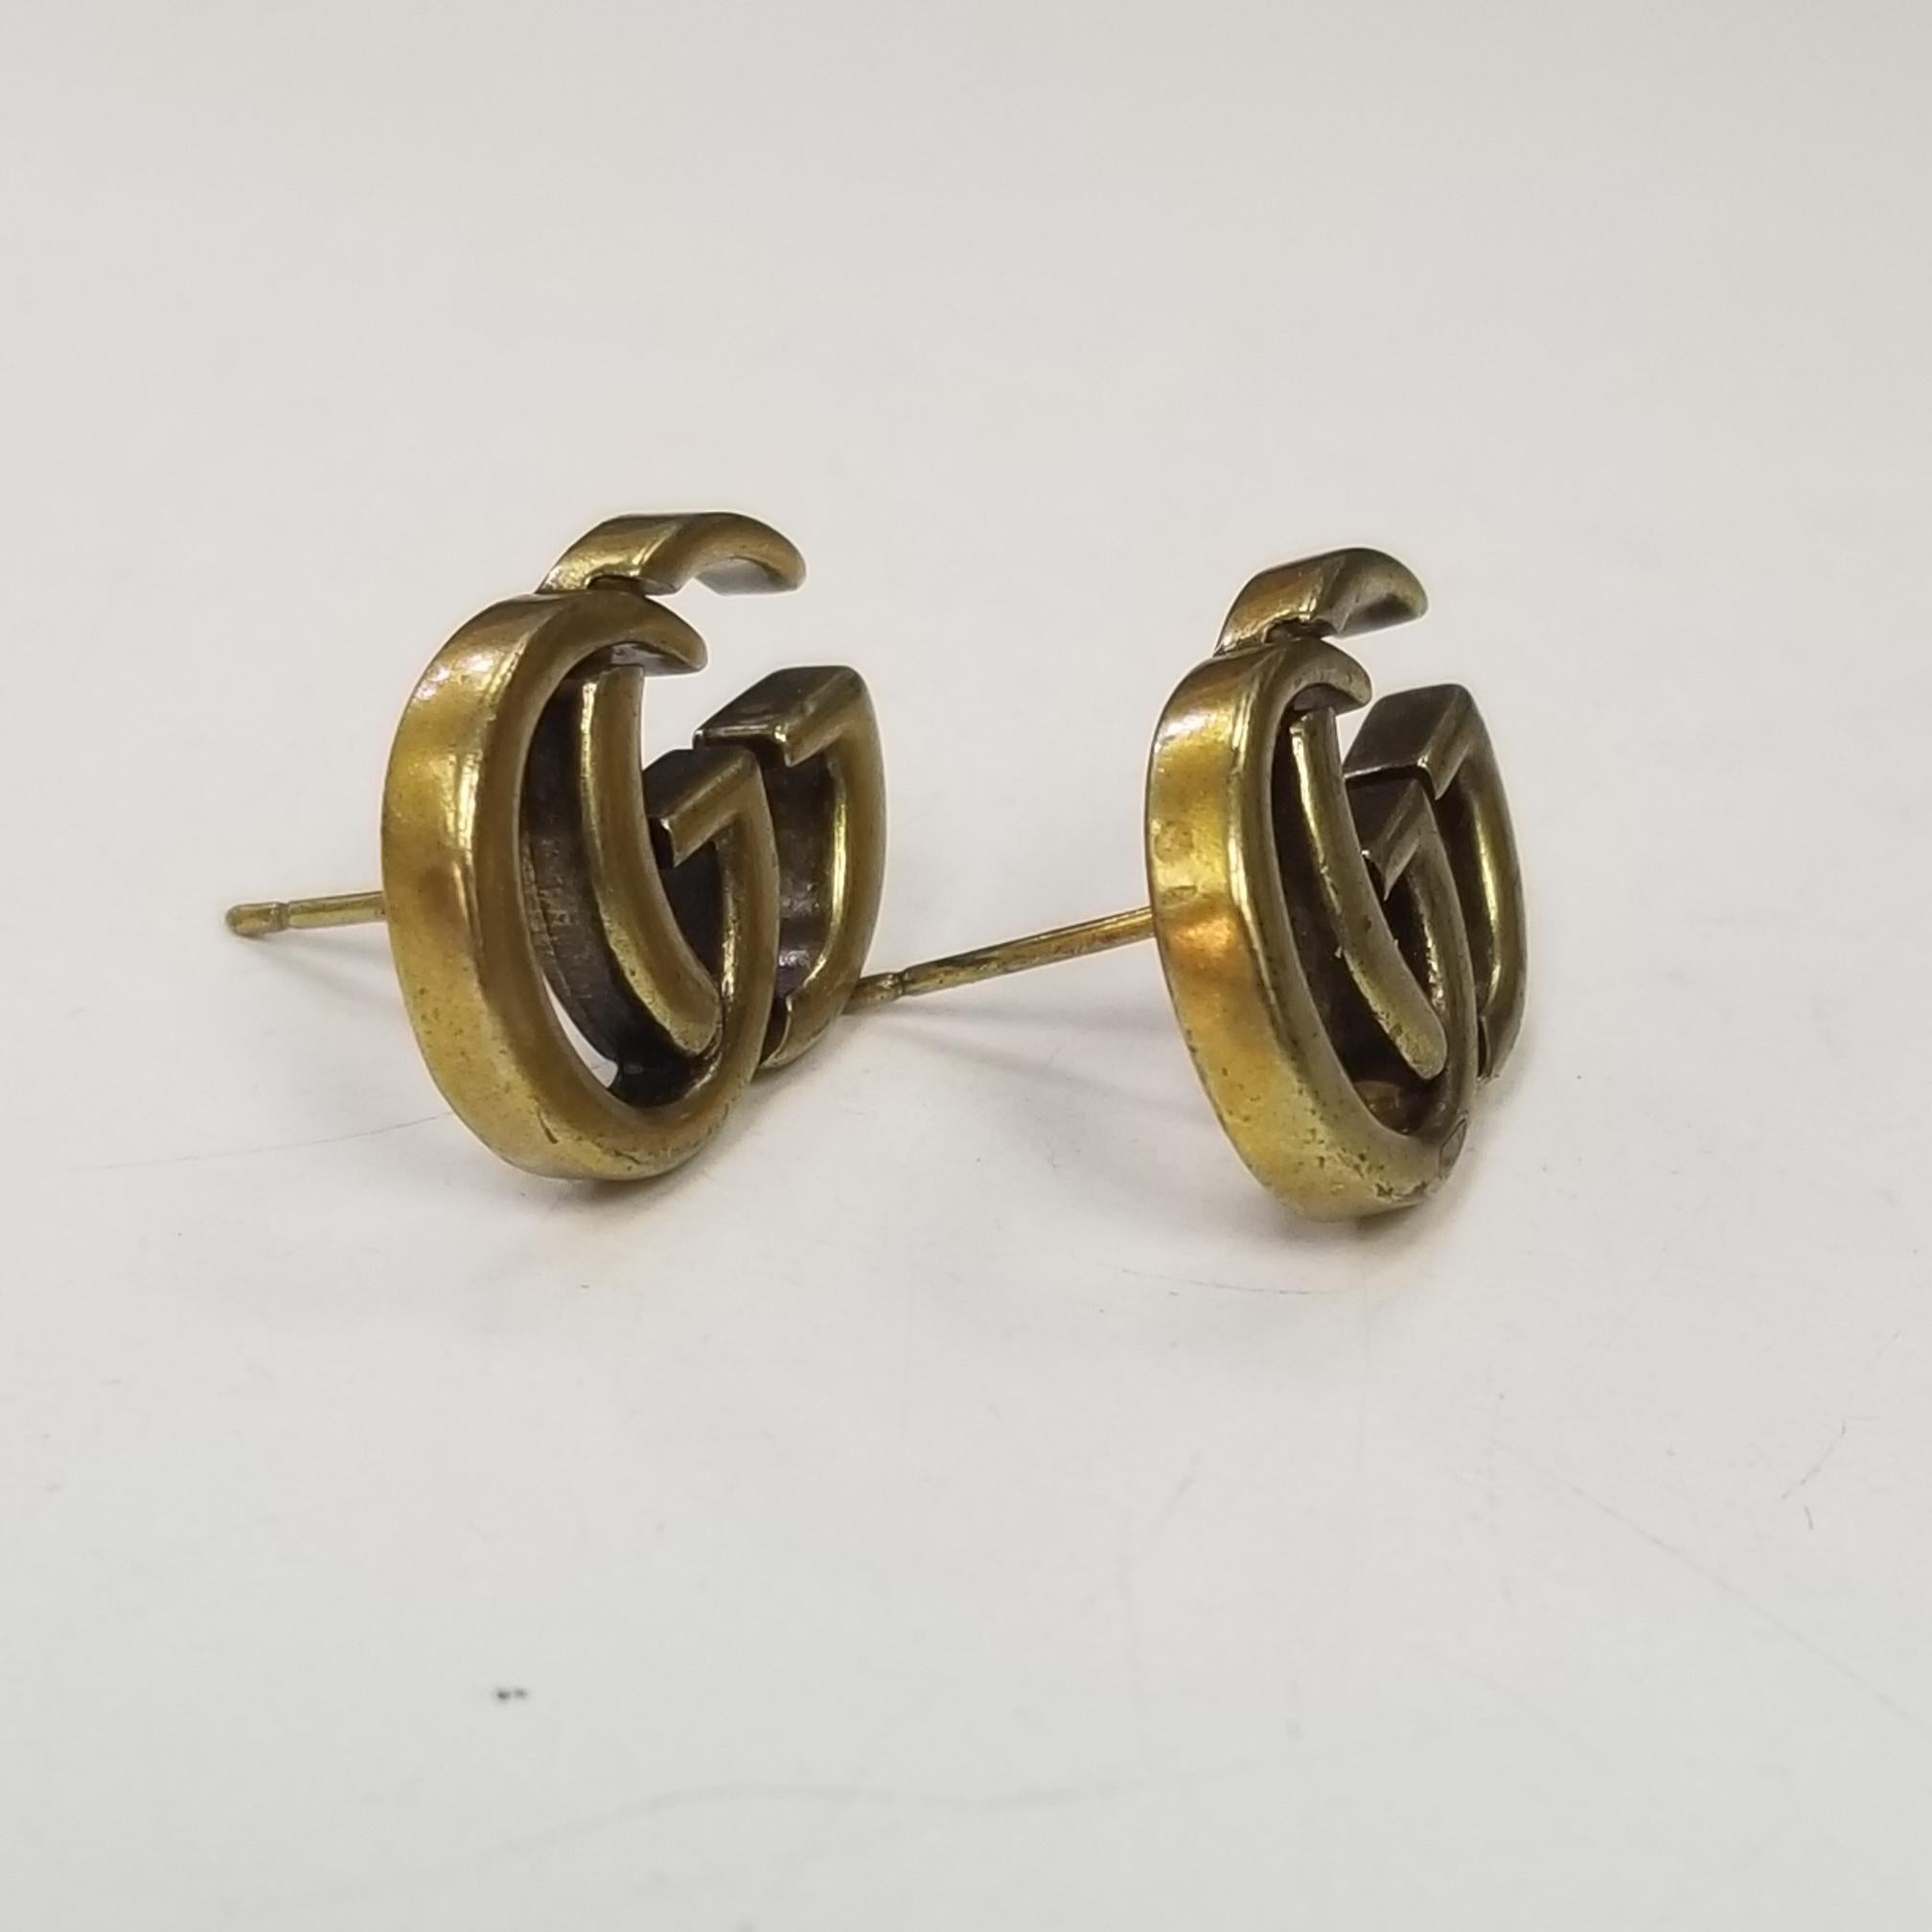  Specification
    Category Earrings
    Brand GUCCI
    Recipient For Her, For Him
    Earring Style Stud Earrings
    Brand Collections GG Marmont
    Metal Type Gold Plated
